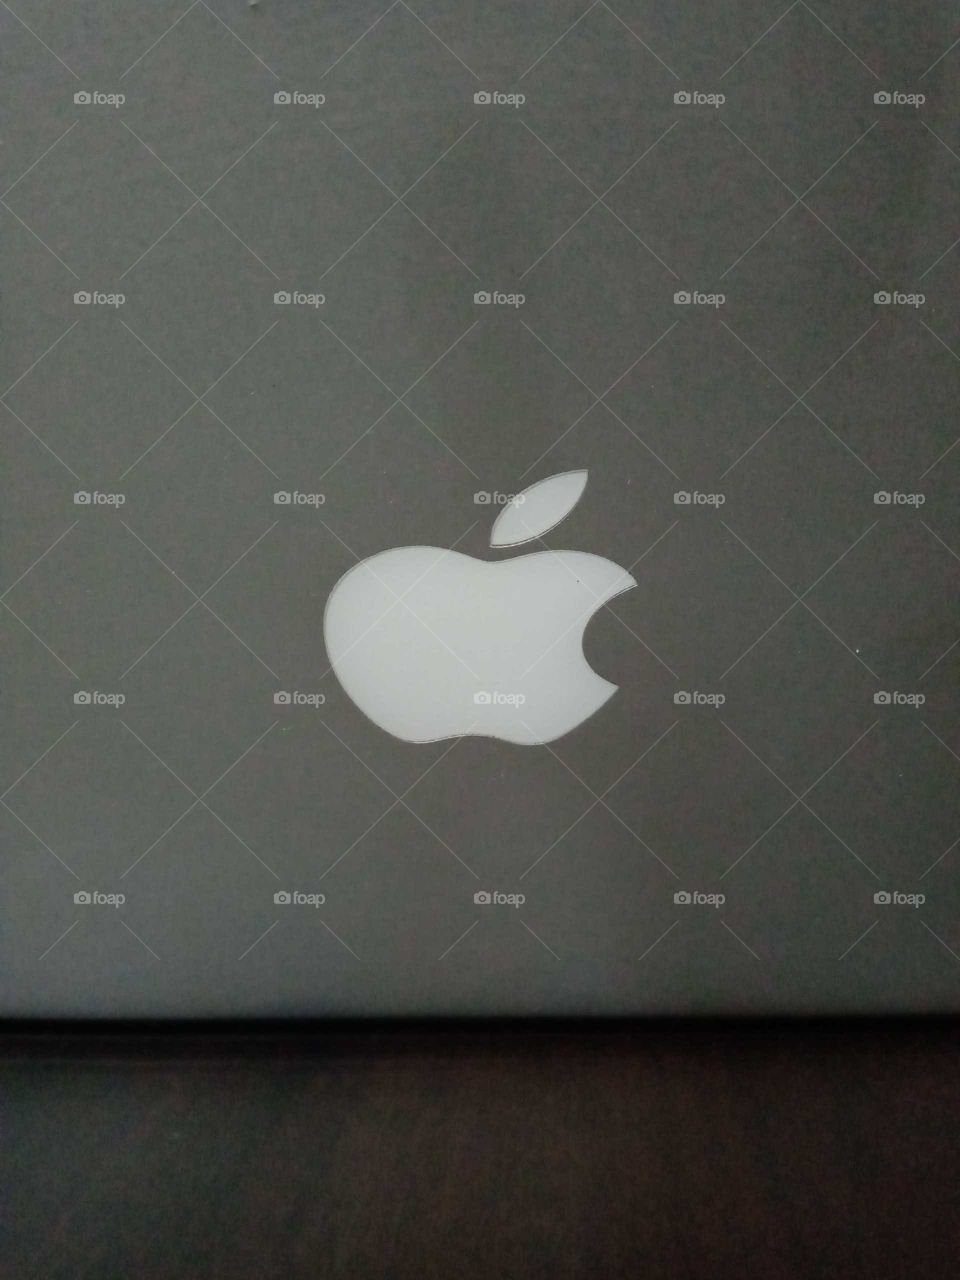 #Apple the brand to have